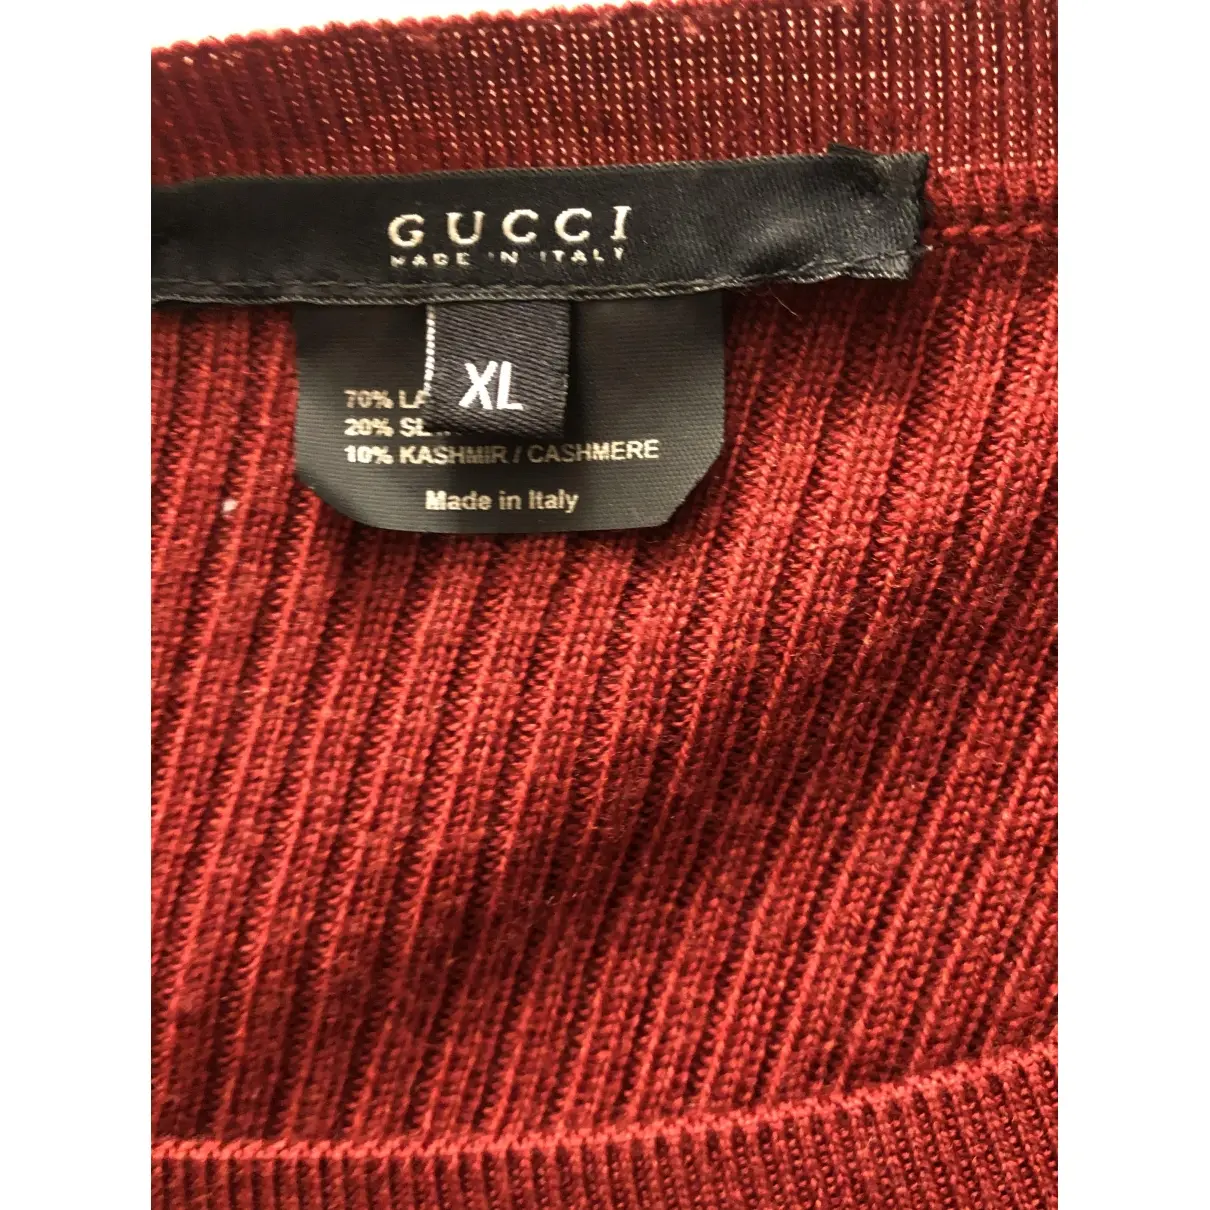 Buy Gucci Wool pull online